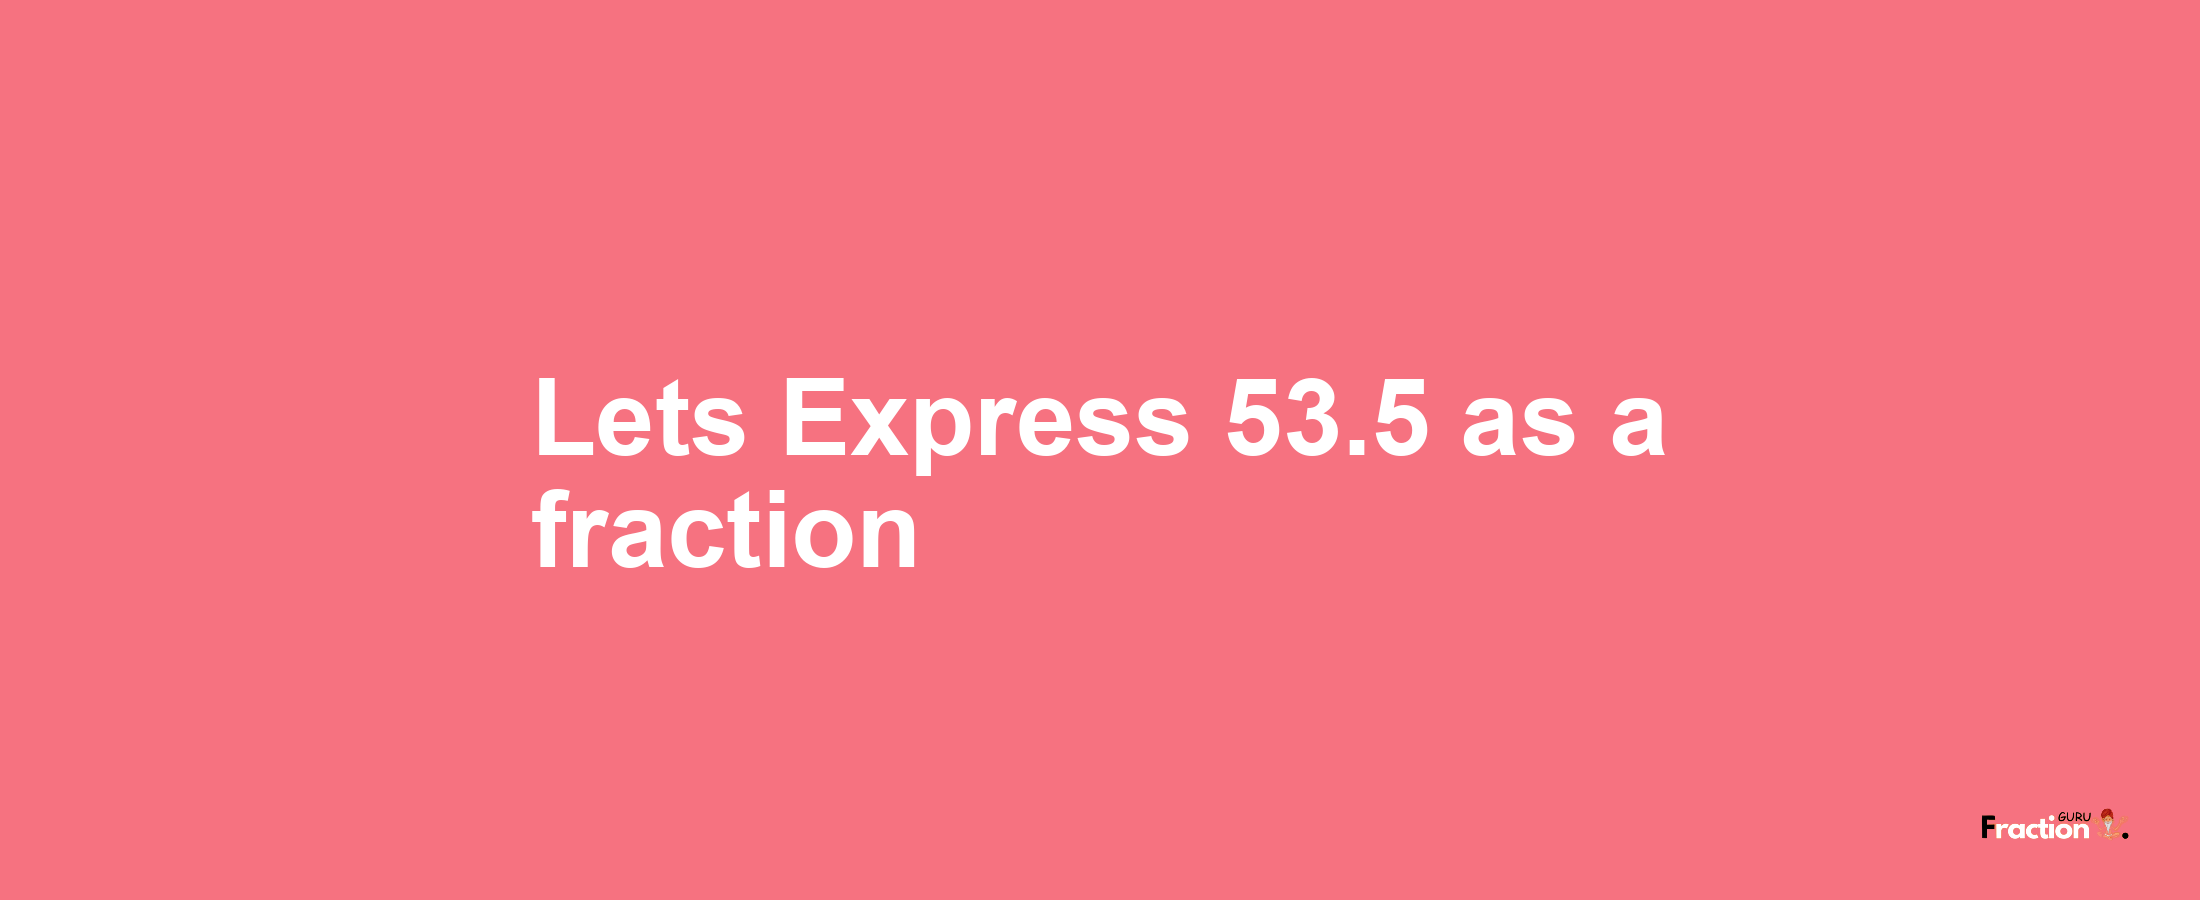 Lets Express 53.5 as afraction